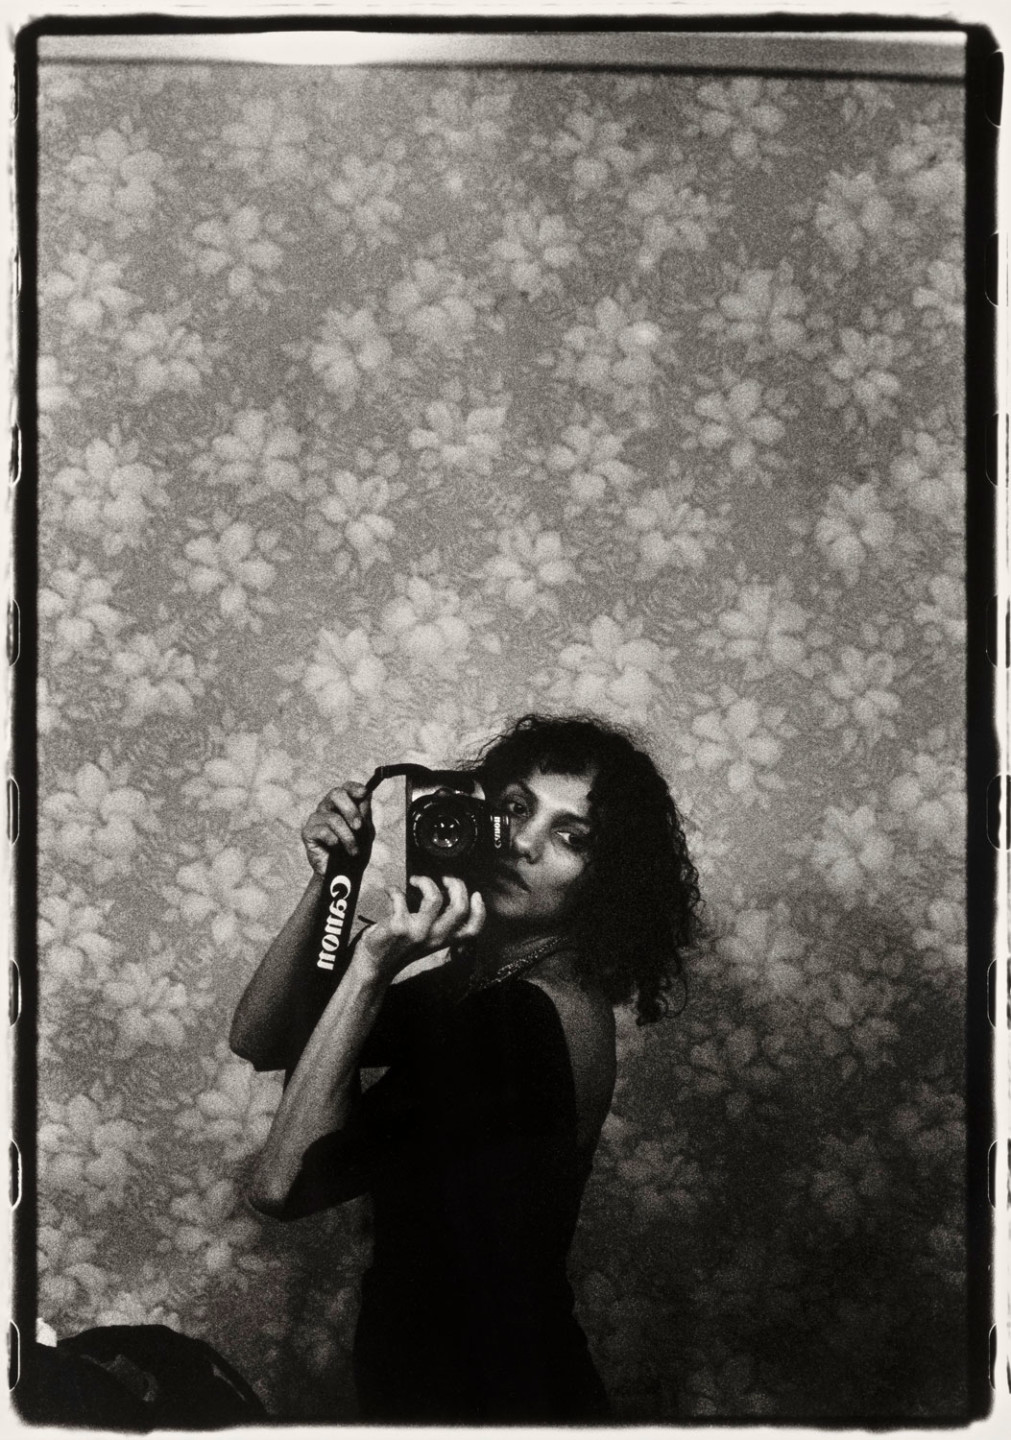 Untitled (Self-Portrait with Camera), New York, NY